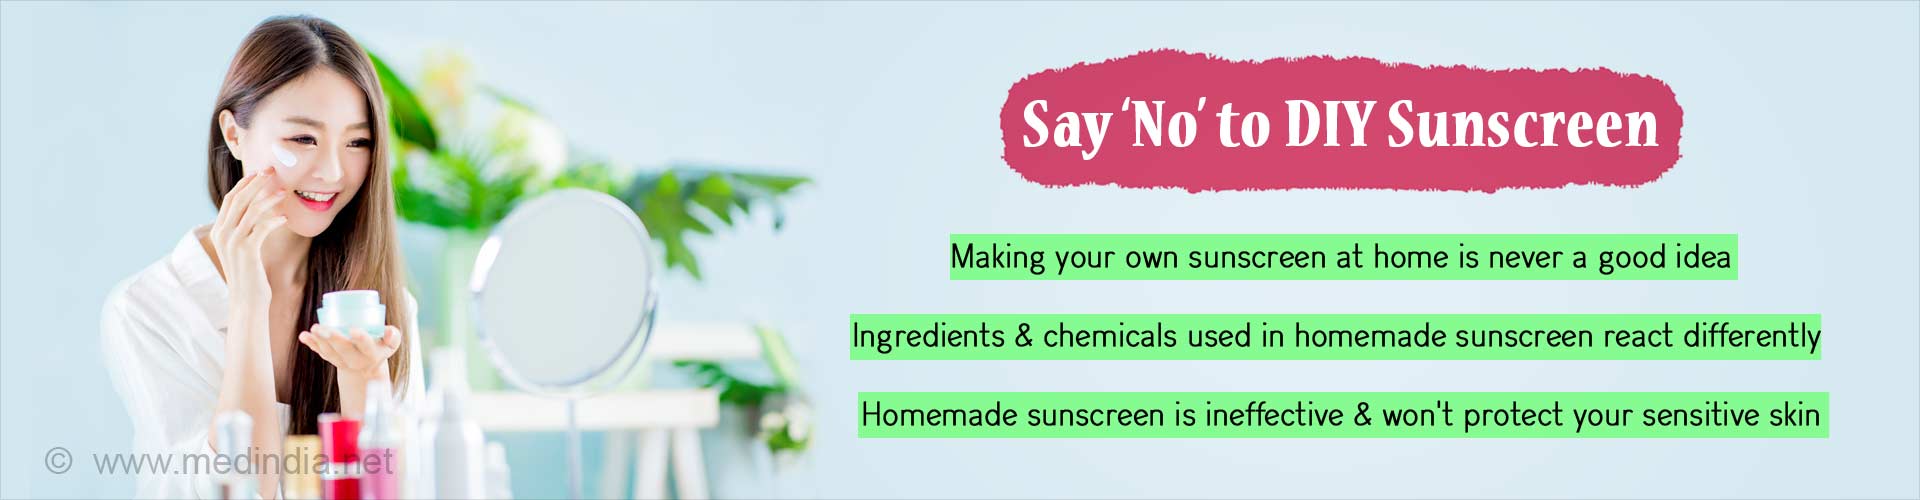 Say no to DIY sunscreen. Making your own sunscreen at home is never a good idea. Ingredients and chemicals used in homemade sunscreen react differently. Homemade sunscreen is ineffective & won't protect your sensitive skin.